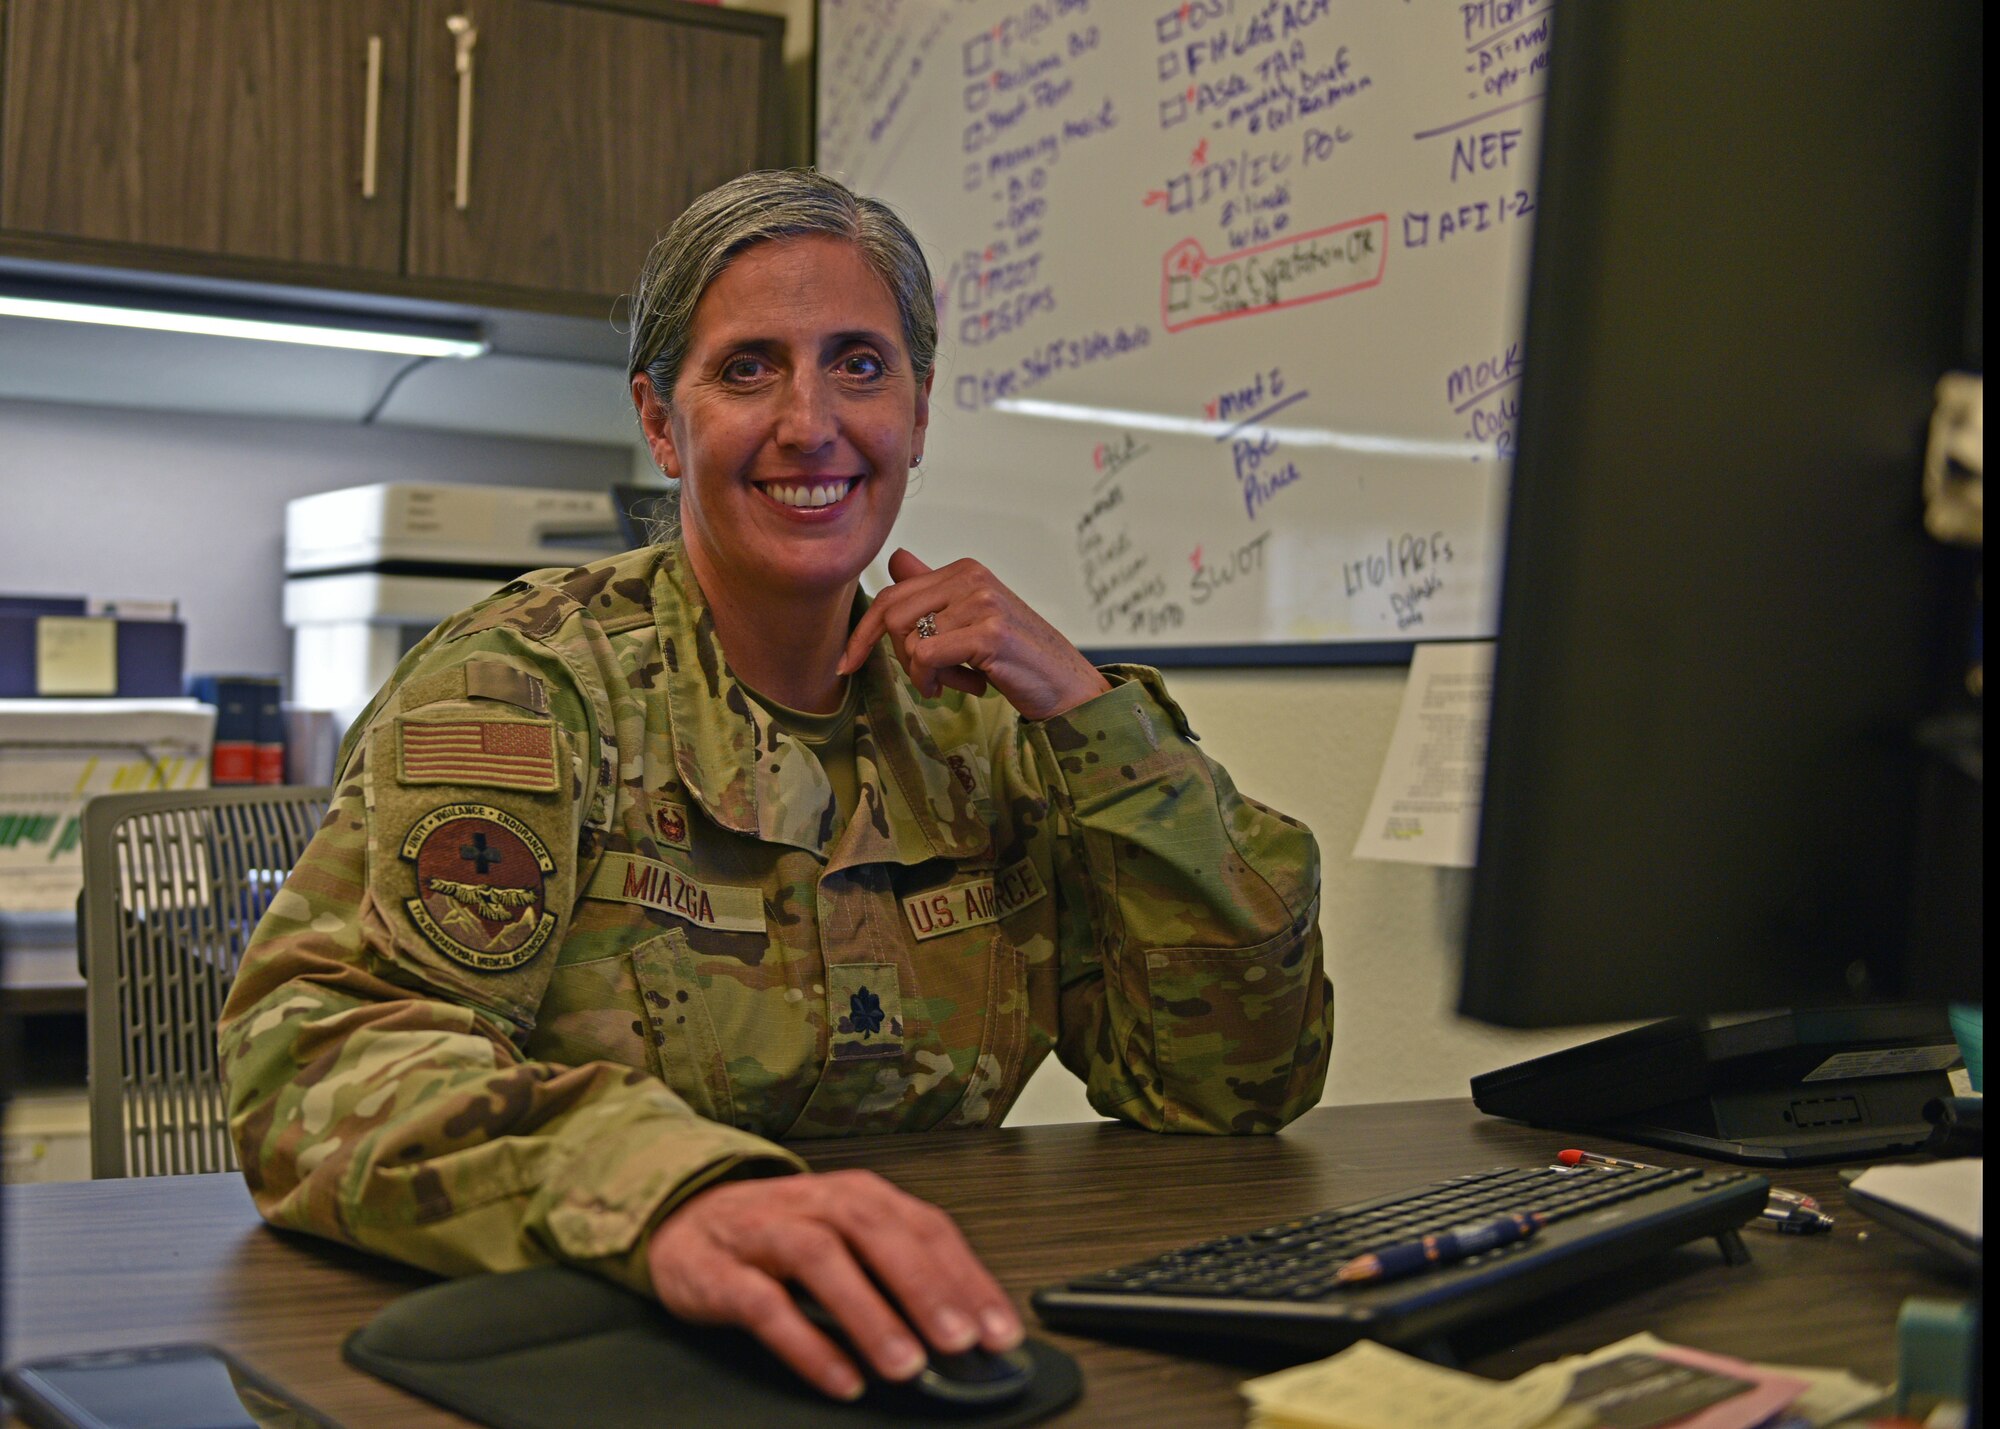 U.S. Air Force Lt. Col. Brenda Miazga, 17th Operational Medical Readiness Squadron commander, poses for a photo at her desk at Goodfellow Air Force Base, Texas, July 12, 2022. Miazga has served 32 years now spanning across the reserve, the inactive ready reserve, and active duty. (U.S. Air Force photo by Senior Airman Ashley Thrash)